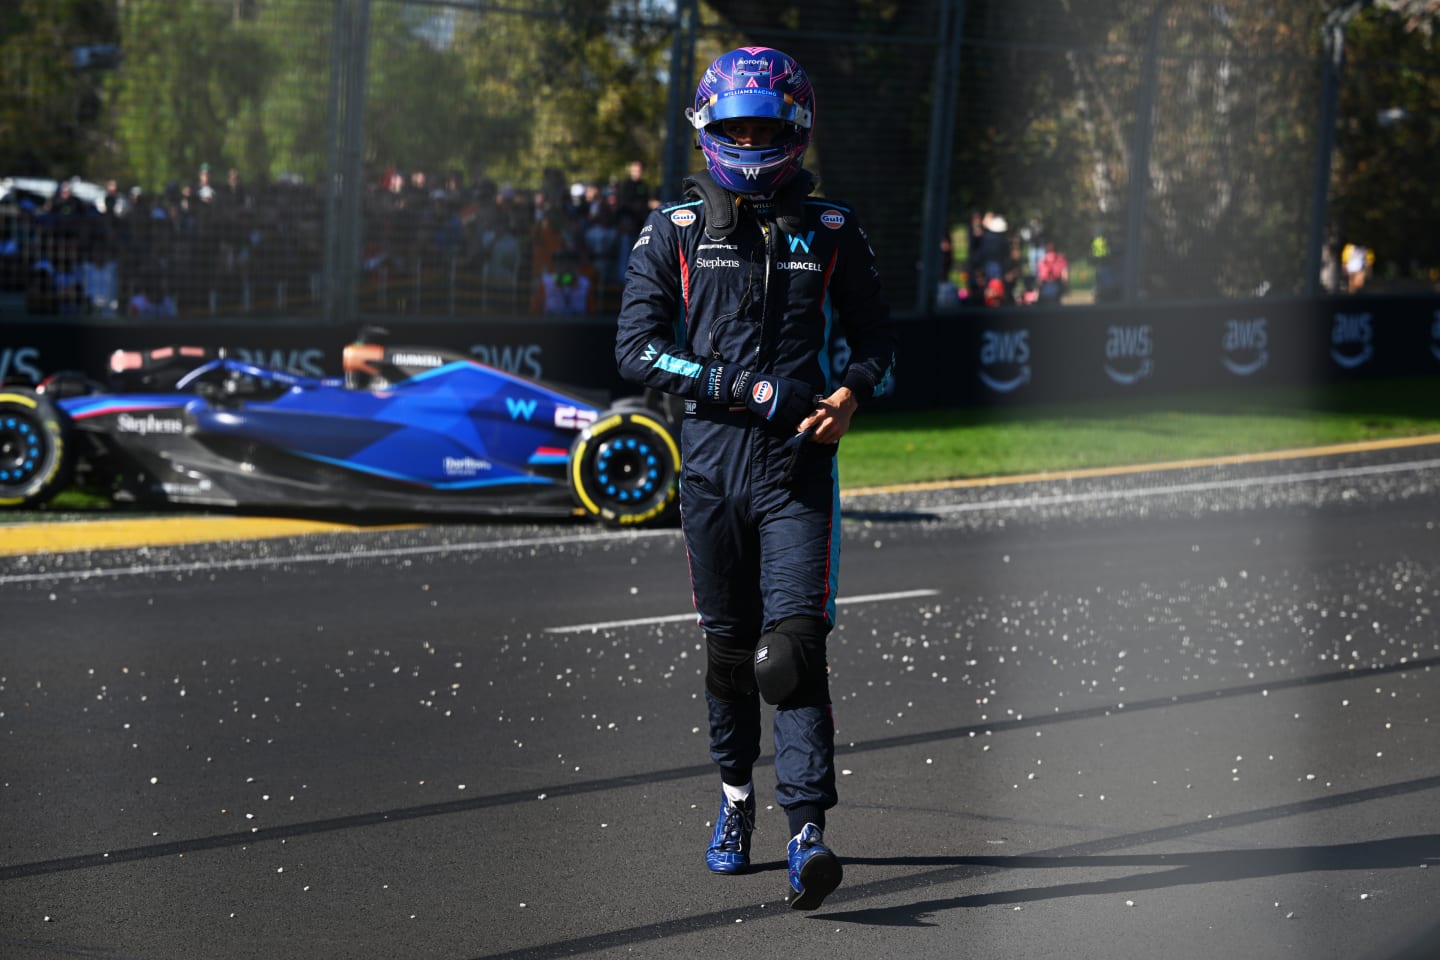 MELBOURNE, AUSTRALIA - APRIL 02: Alexander Albon of Thailand and Williams walks from his car after a crash that led to a red flag during the F1 Grand Prix of Australia at Albert Park Grand Prix Circuit on April 02, 2023 in Melbourne, Australia. (Photo by Clive Mason - Formula 1/Formula 1 via Getty Images)